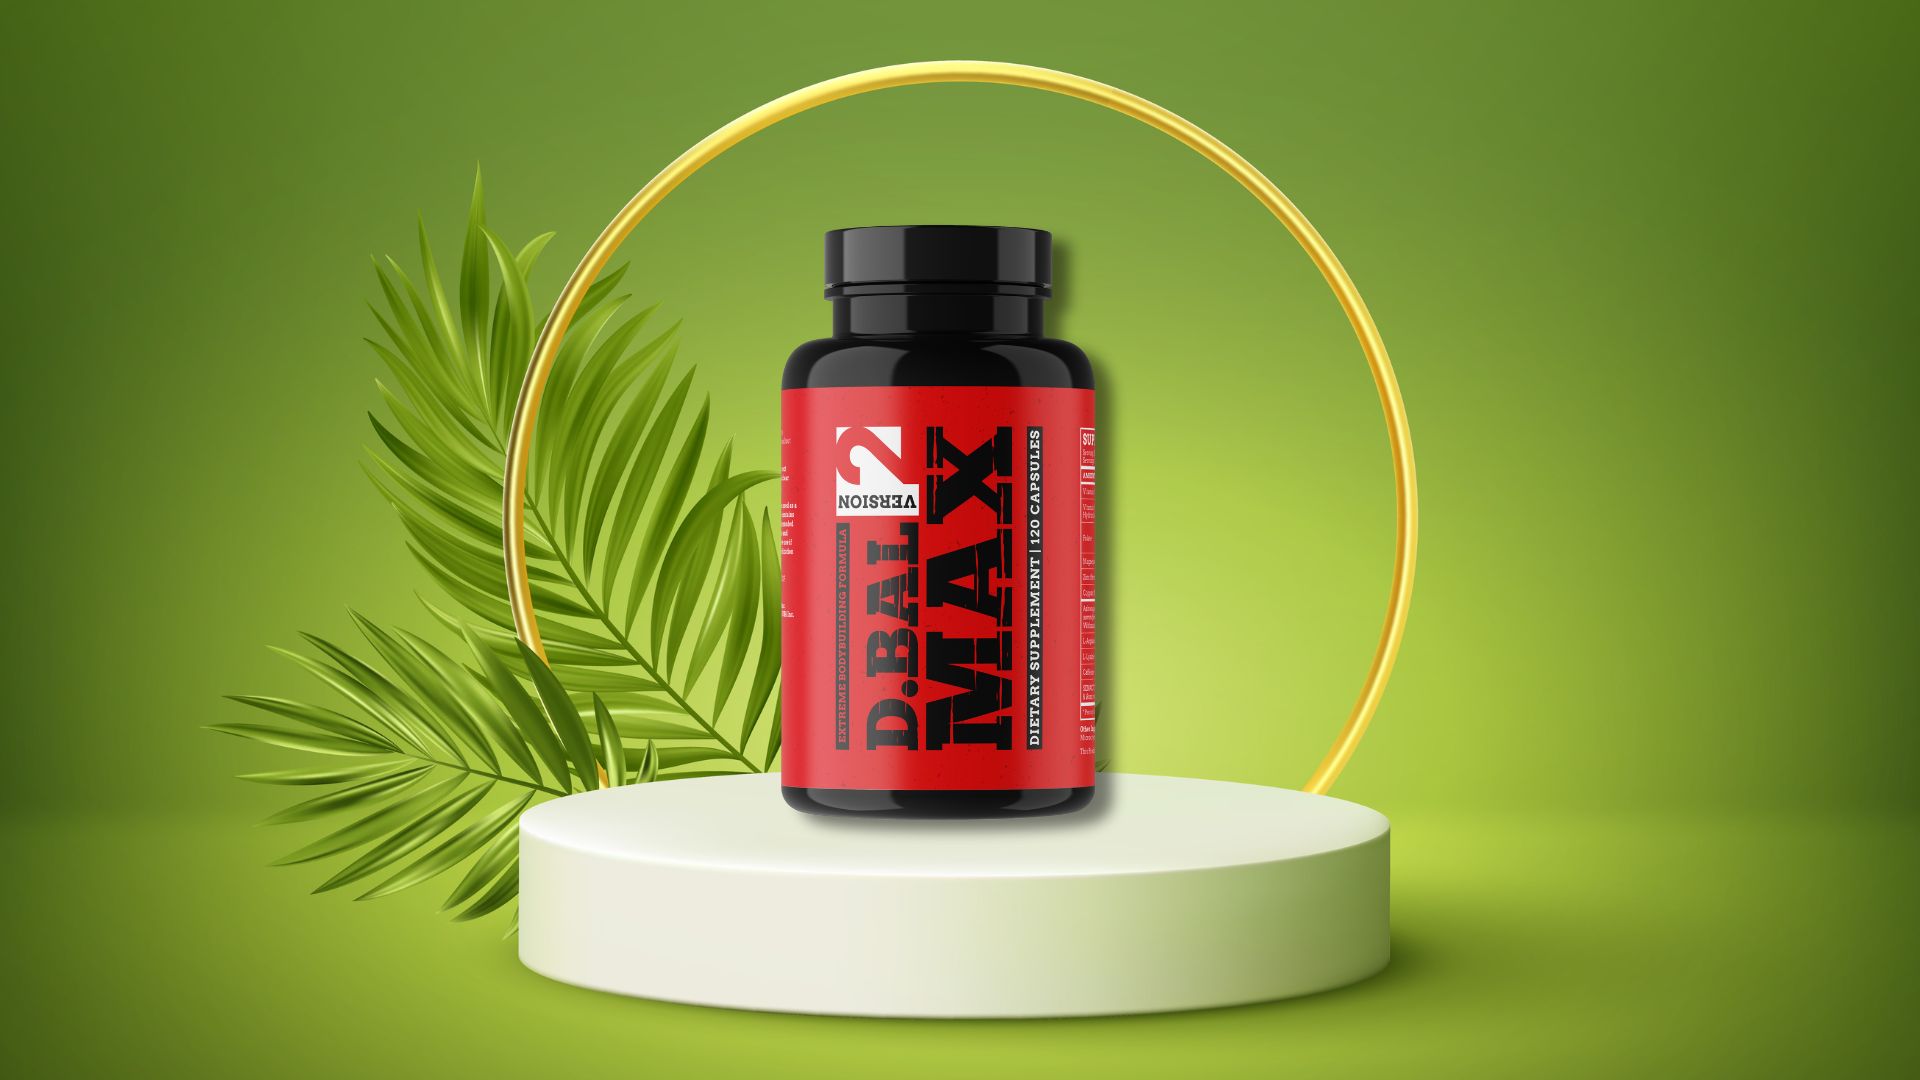 D-Bal MAX Reviews | Ingredients, Dosage, Benefits, Pros and Cons